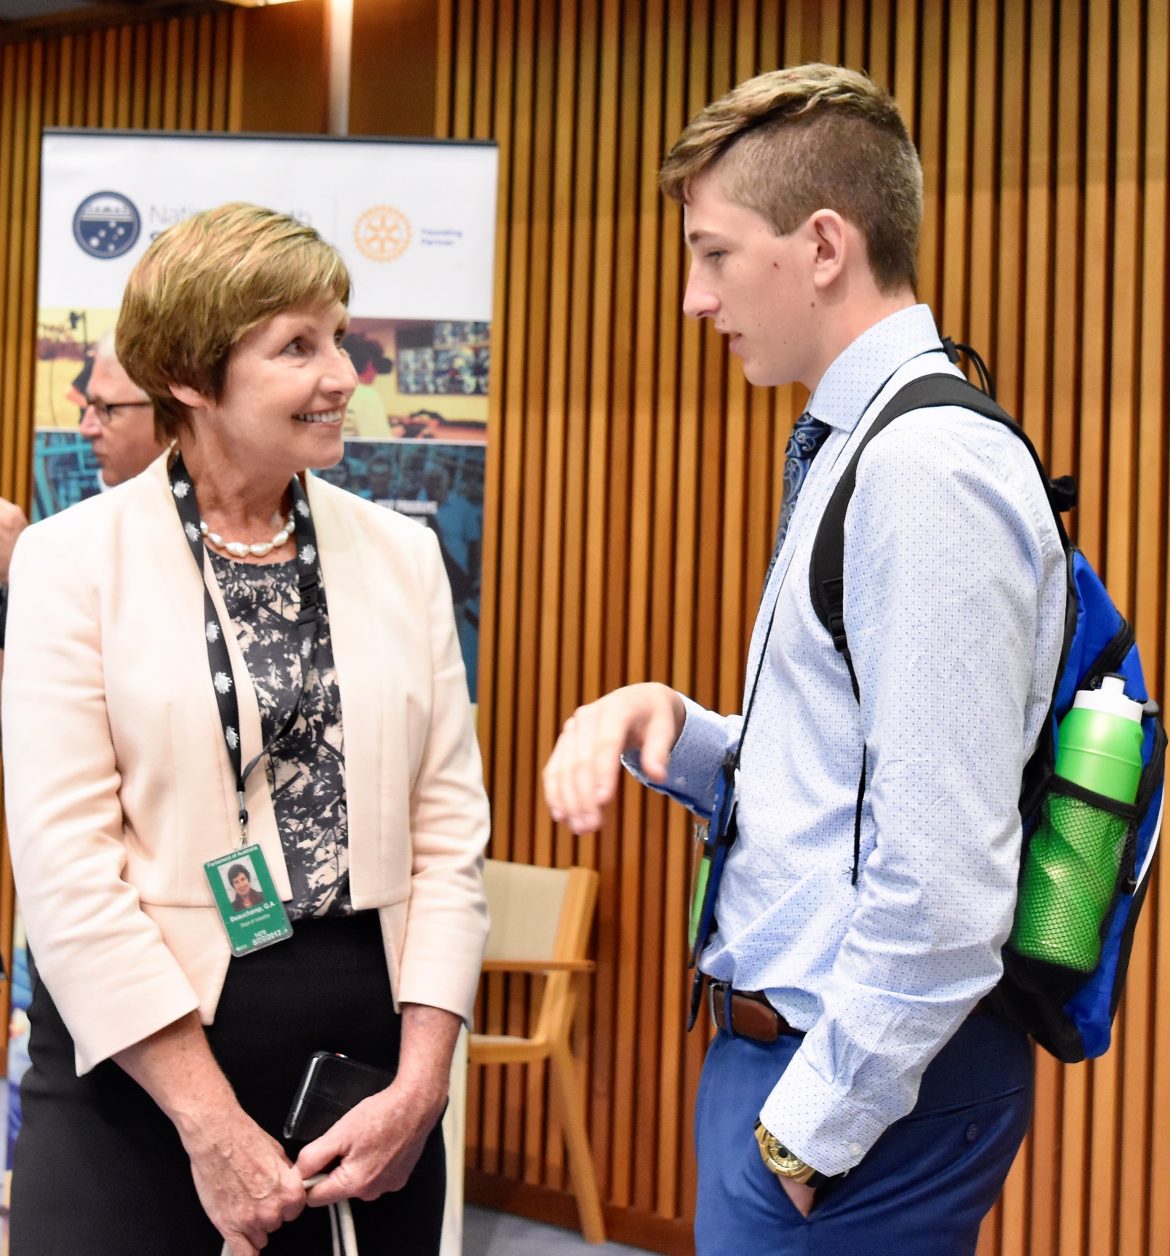 NYSF 2017 Session C welcomed to Parliament House - content image